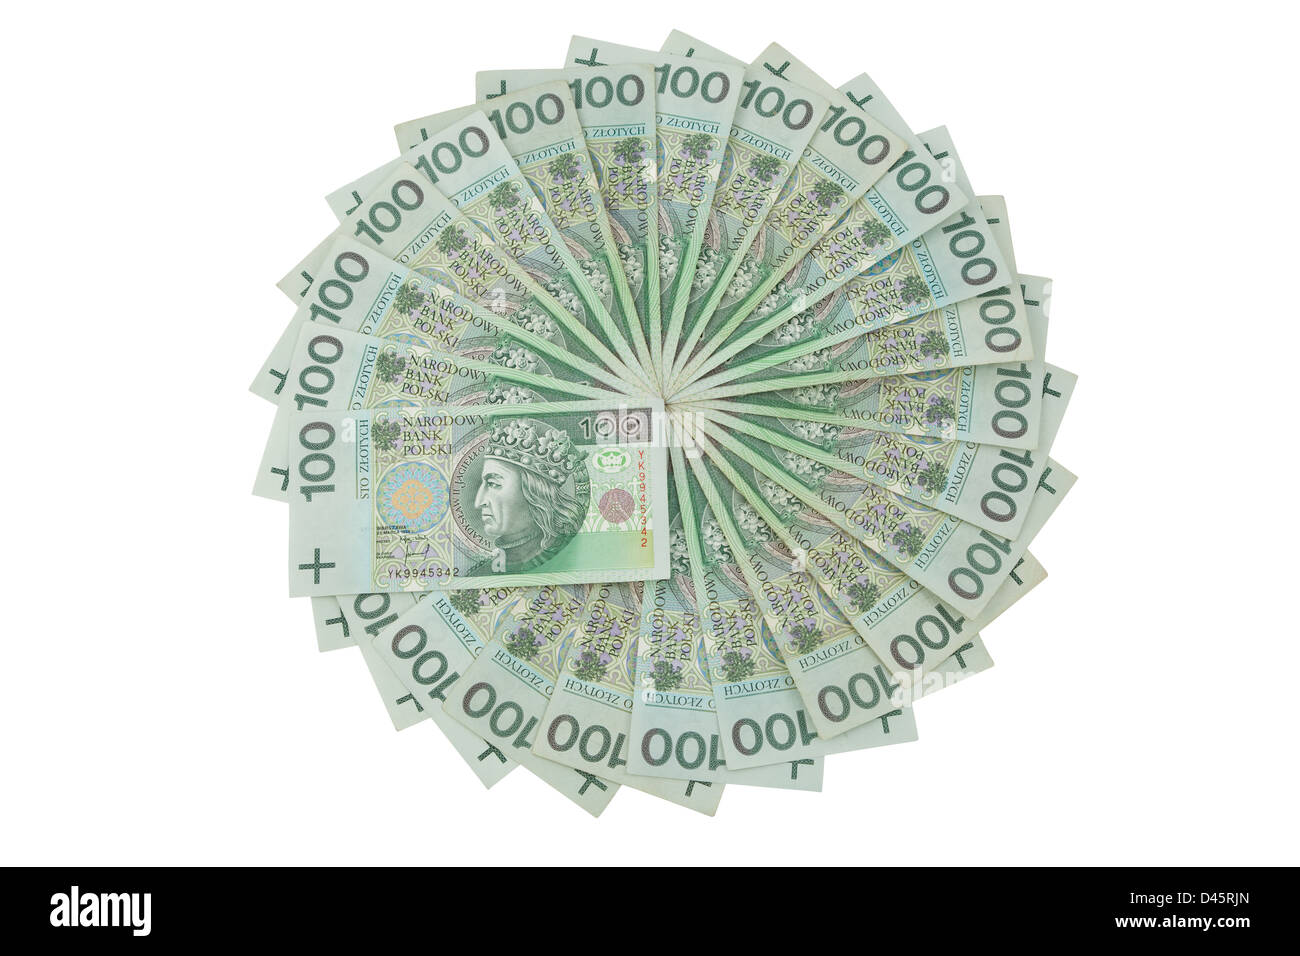 Poland currency in shape circle on white background Stock Photo